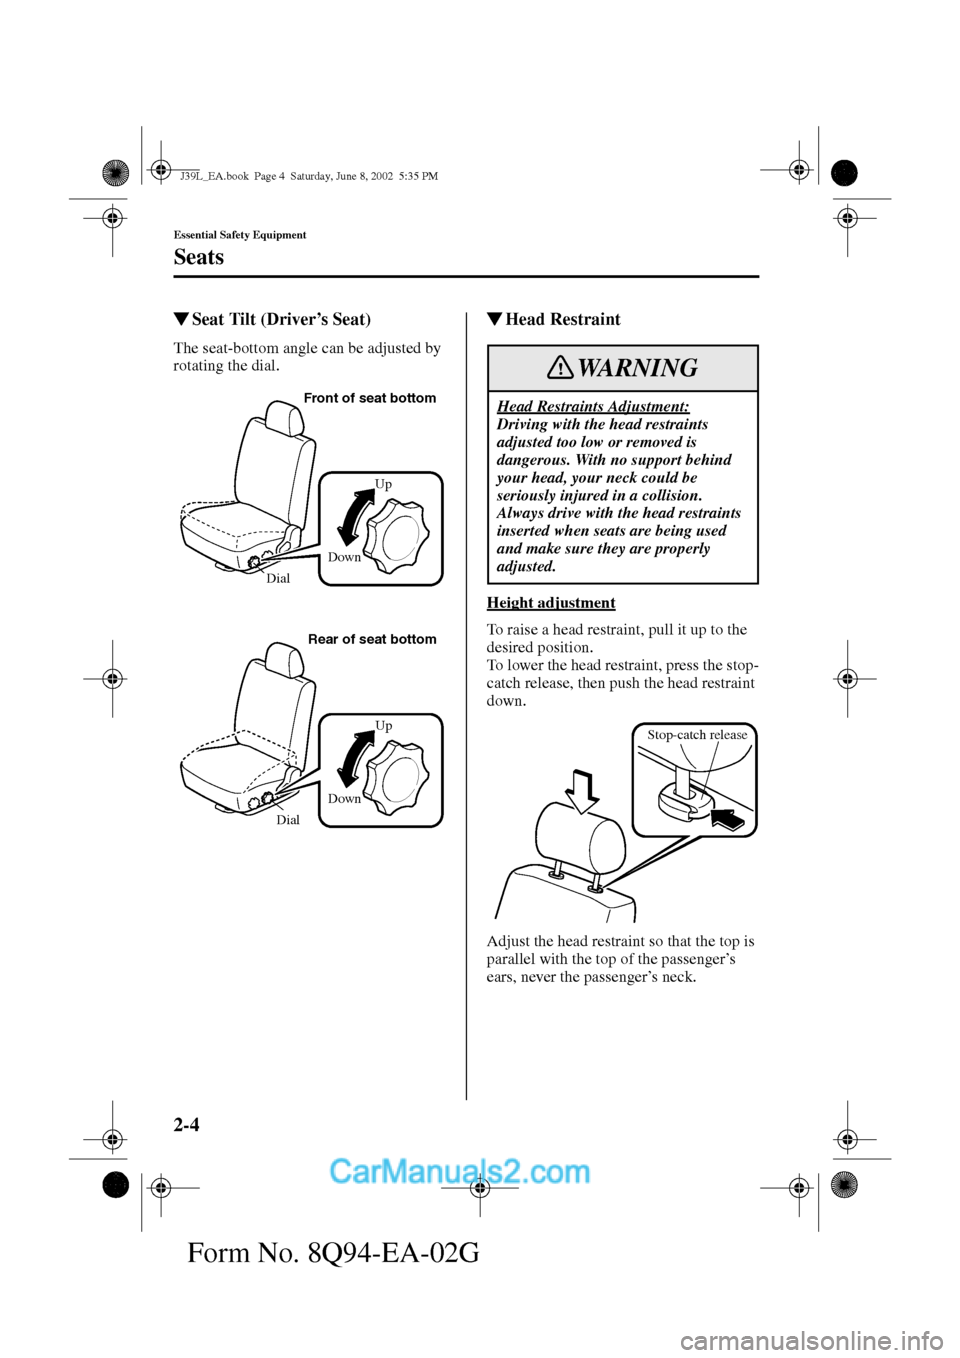 MAZDA MODEL PROTÉGÉ 2003   (in English) User Guide 2-4
Essential Safety Equipment
Seats
Form No. 8Q94-EA-02G
Seat Tilt (Driver’s Seat)
The seat-bottom angle can be adjusted by 
rotating the dial.
Head Restraint
Height adjustment
To raise a head re